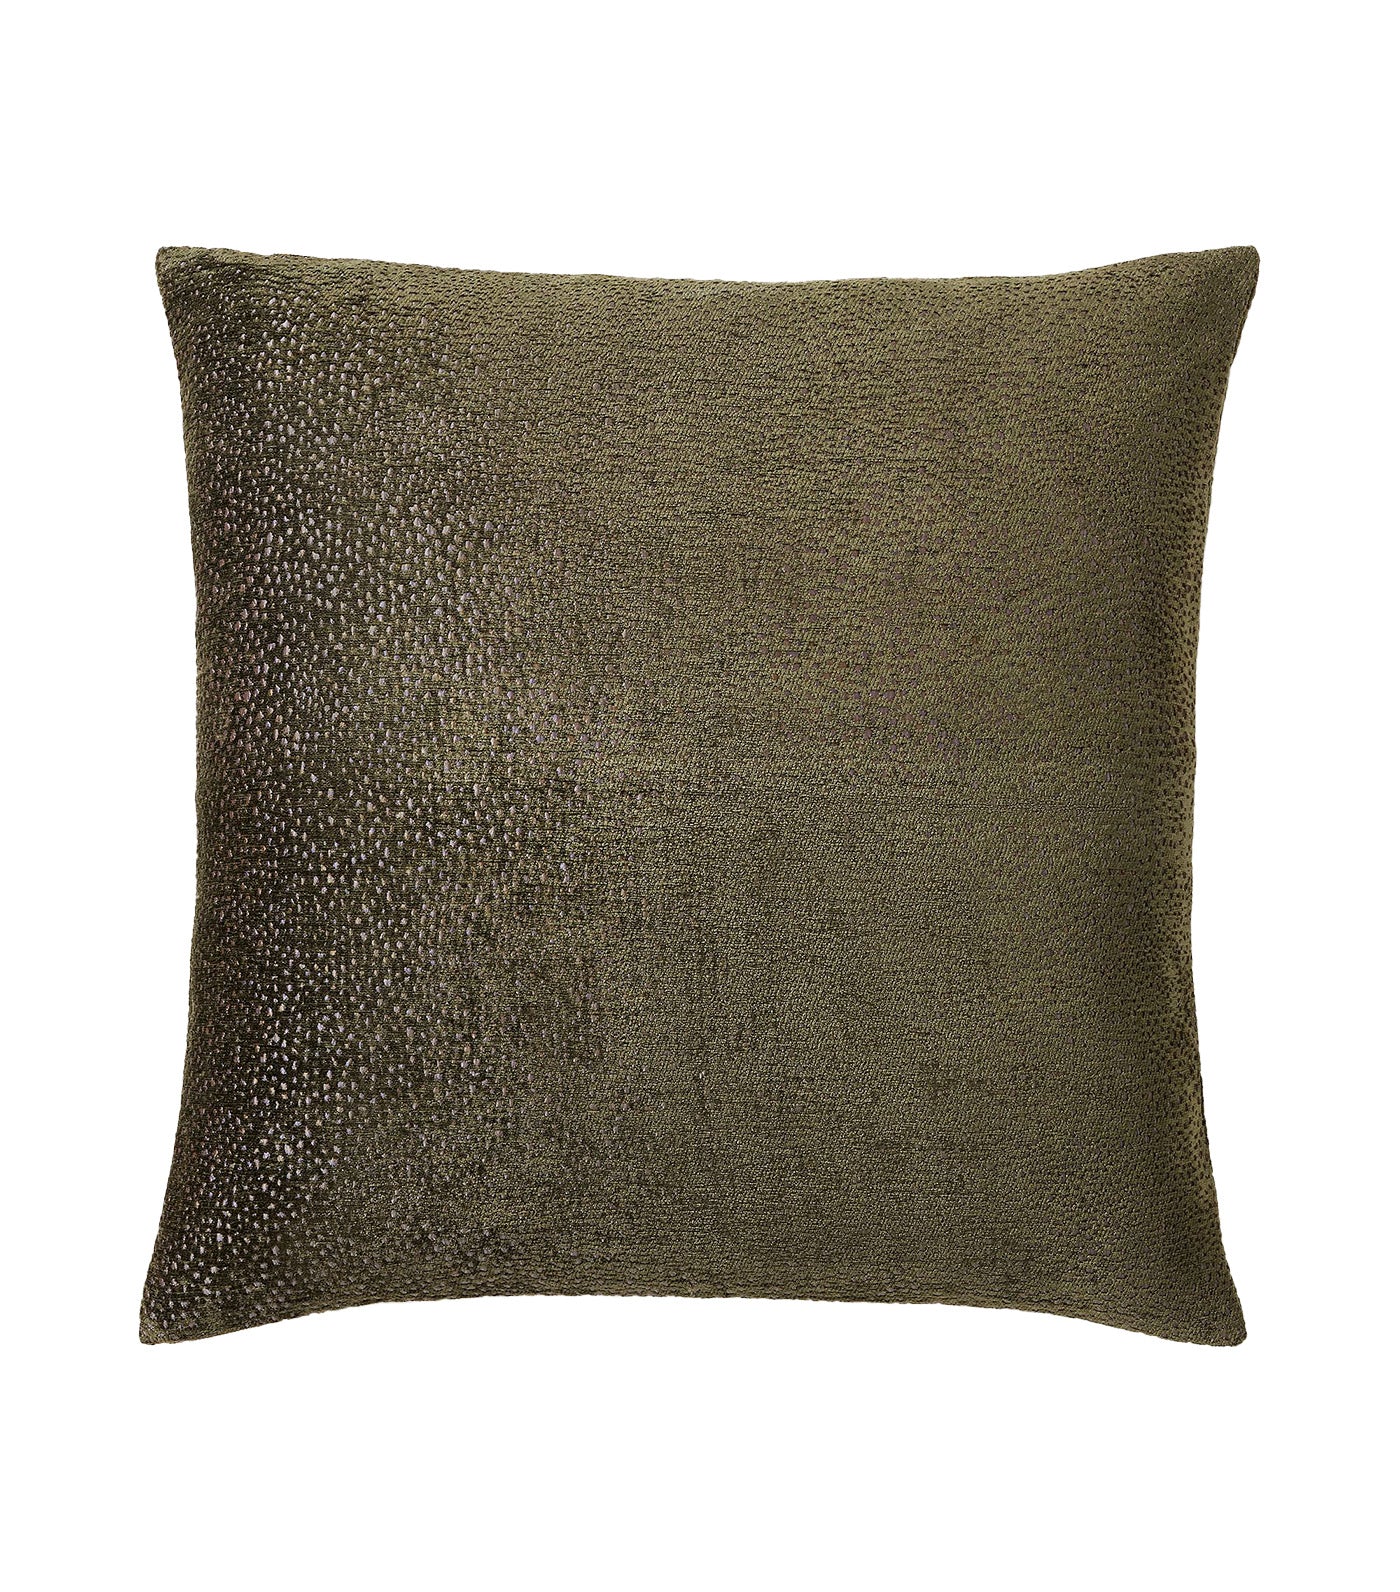 Dotted Chenille Jacquard Pillow Cover